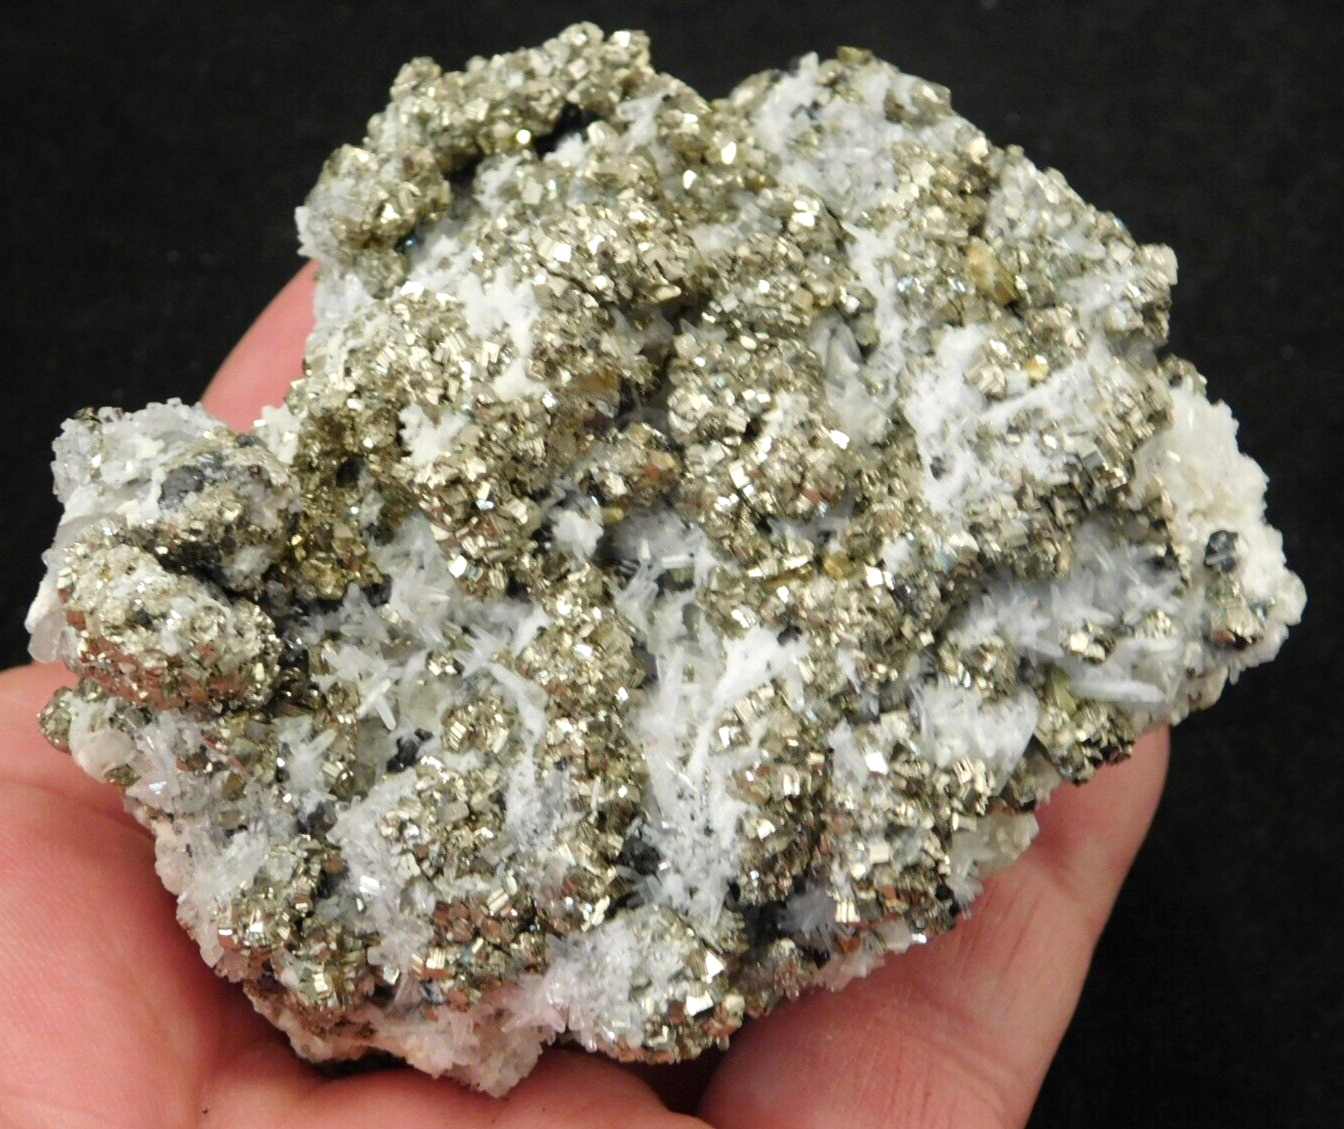 Big Druzy Qurartz and Calcite Crystal Cluster with Pyrite Crystals 269gr